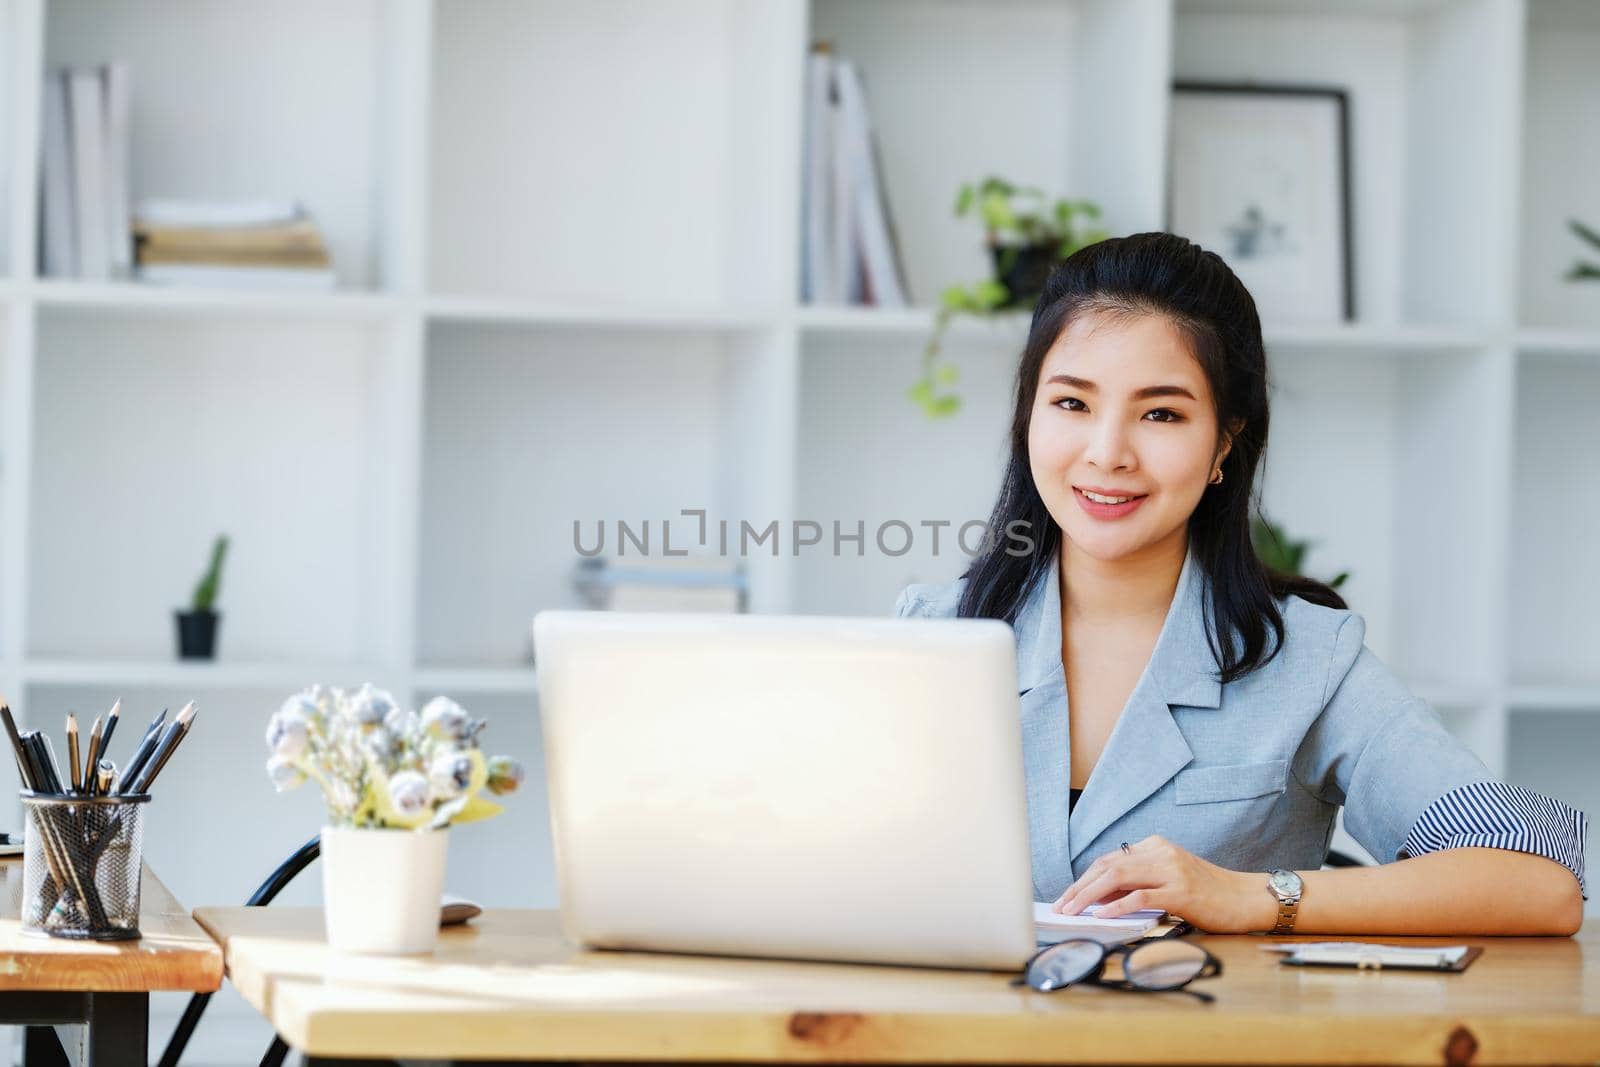 An Asian entrepreneur or businesswoman shows a smiling face while working with using computer on a wooden table